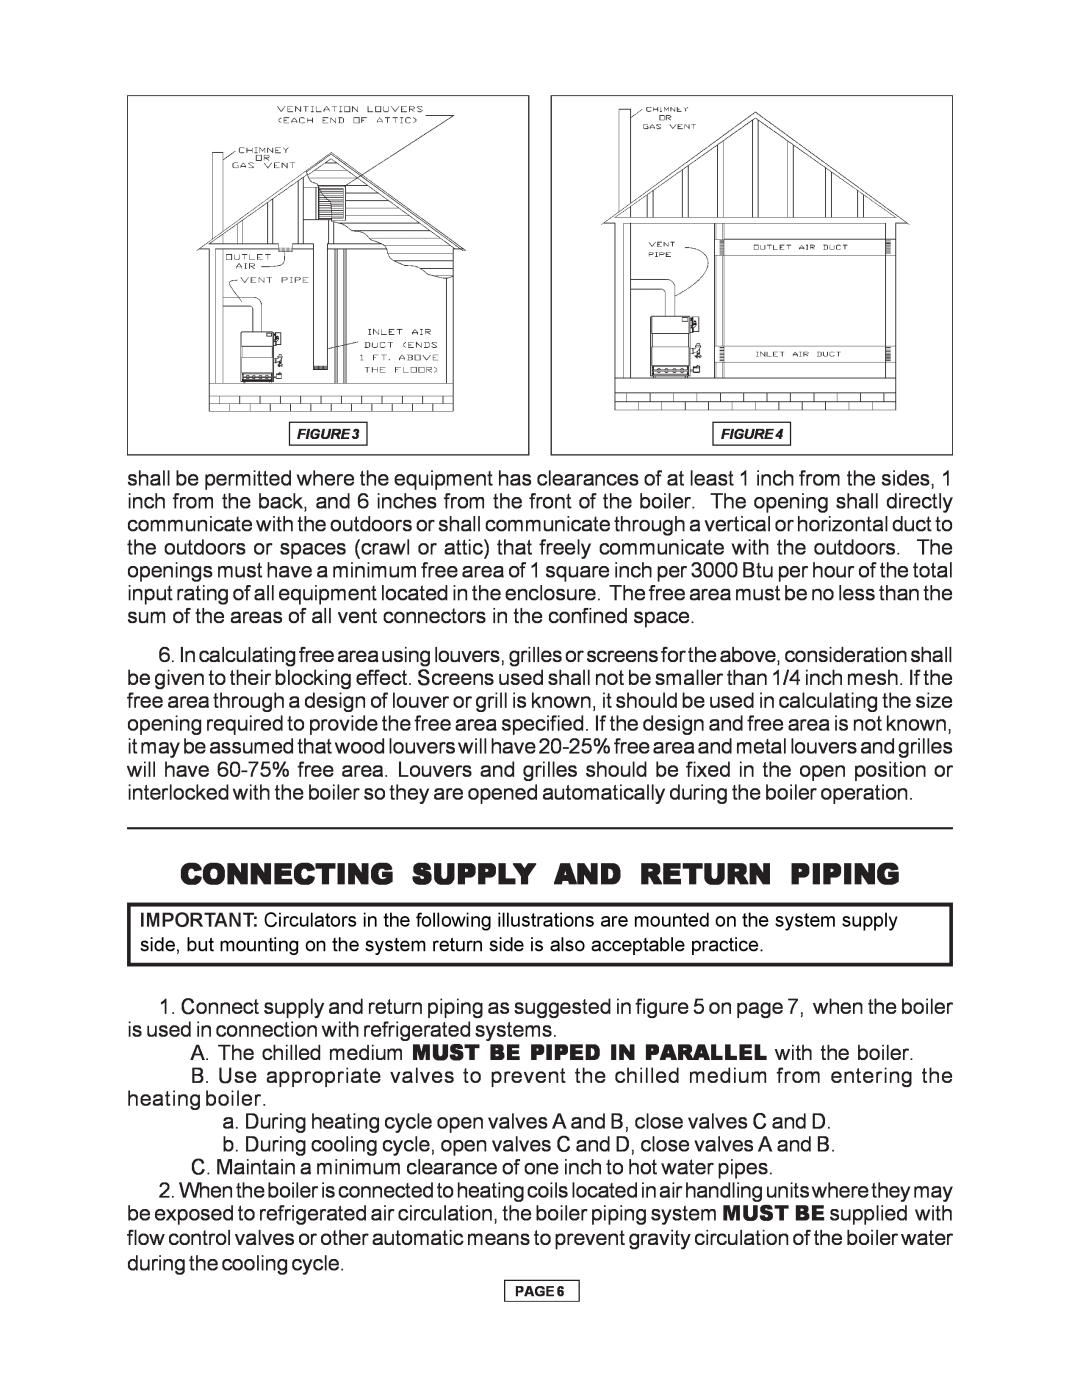 Utica Gas-fired Boiler manual Connecting Supply And Return Piping 